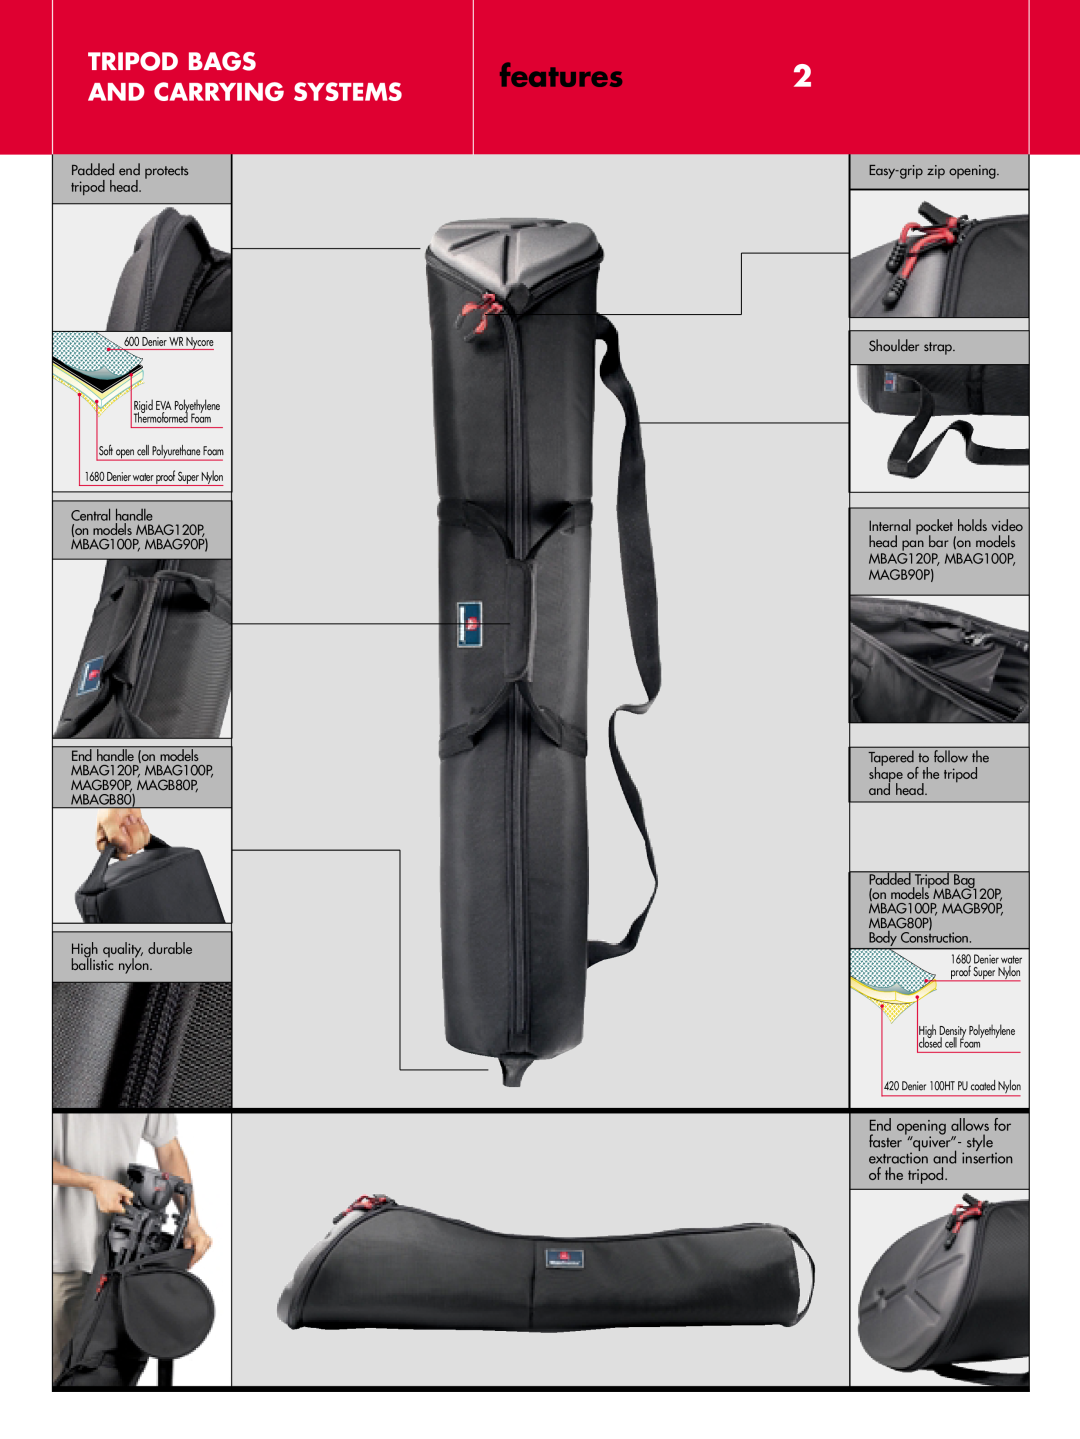 Manfrotto MBAG90P, MBAGD, MBAG70, MBAG120P, MBAG100P, MBAG80P manual features2, Tripod Bags And Carrying Systems 